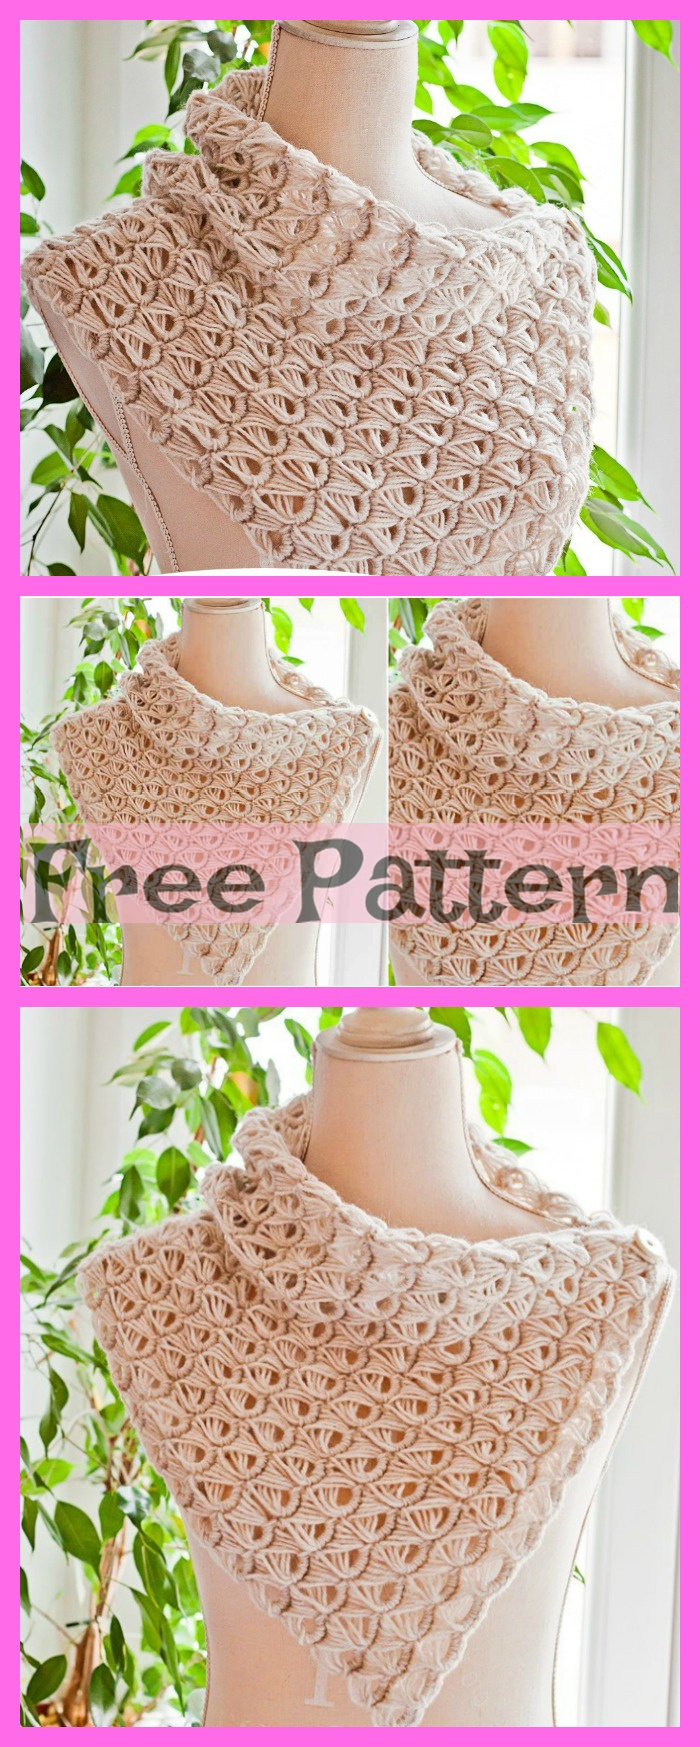 diy4ever-Crochet Broomstick Lace Cowl - Free Patterns 